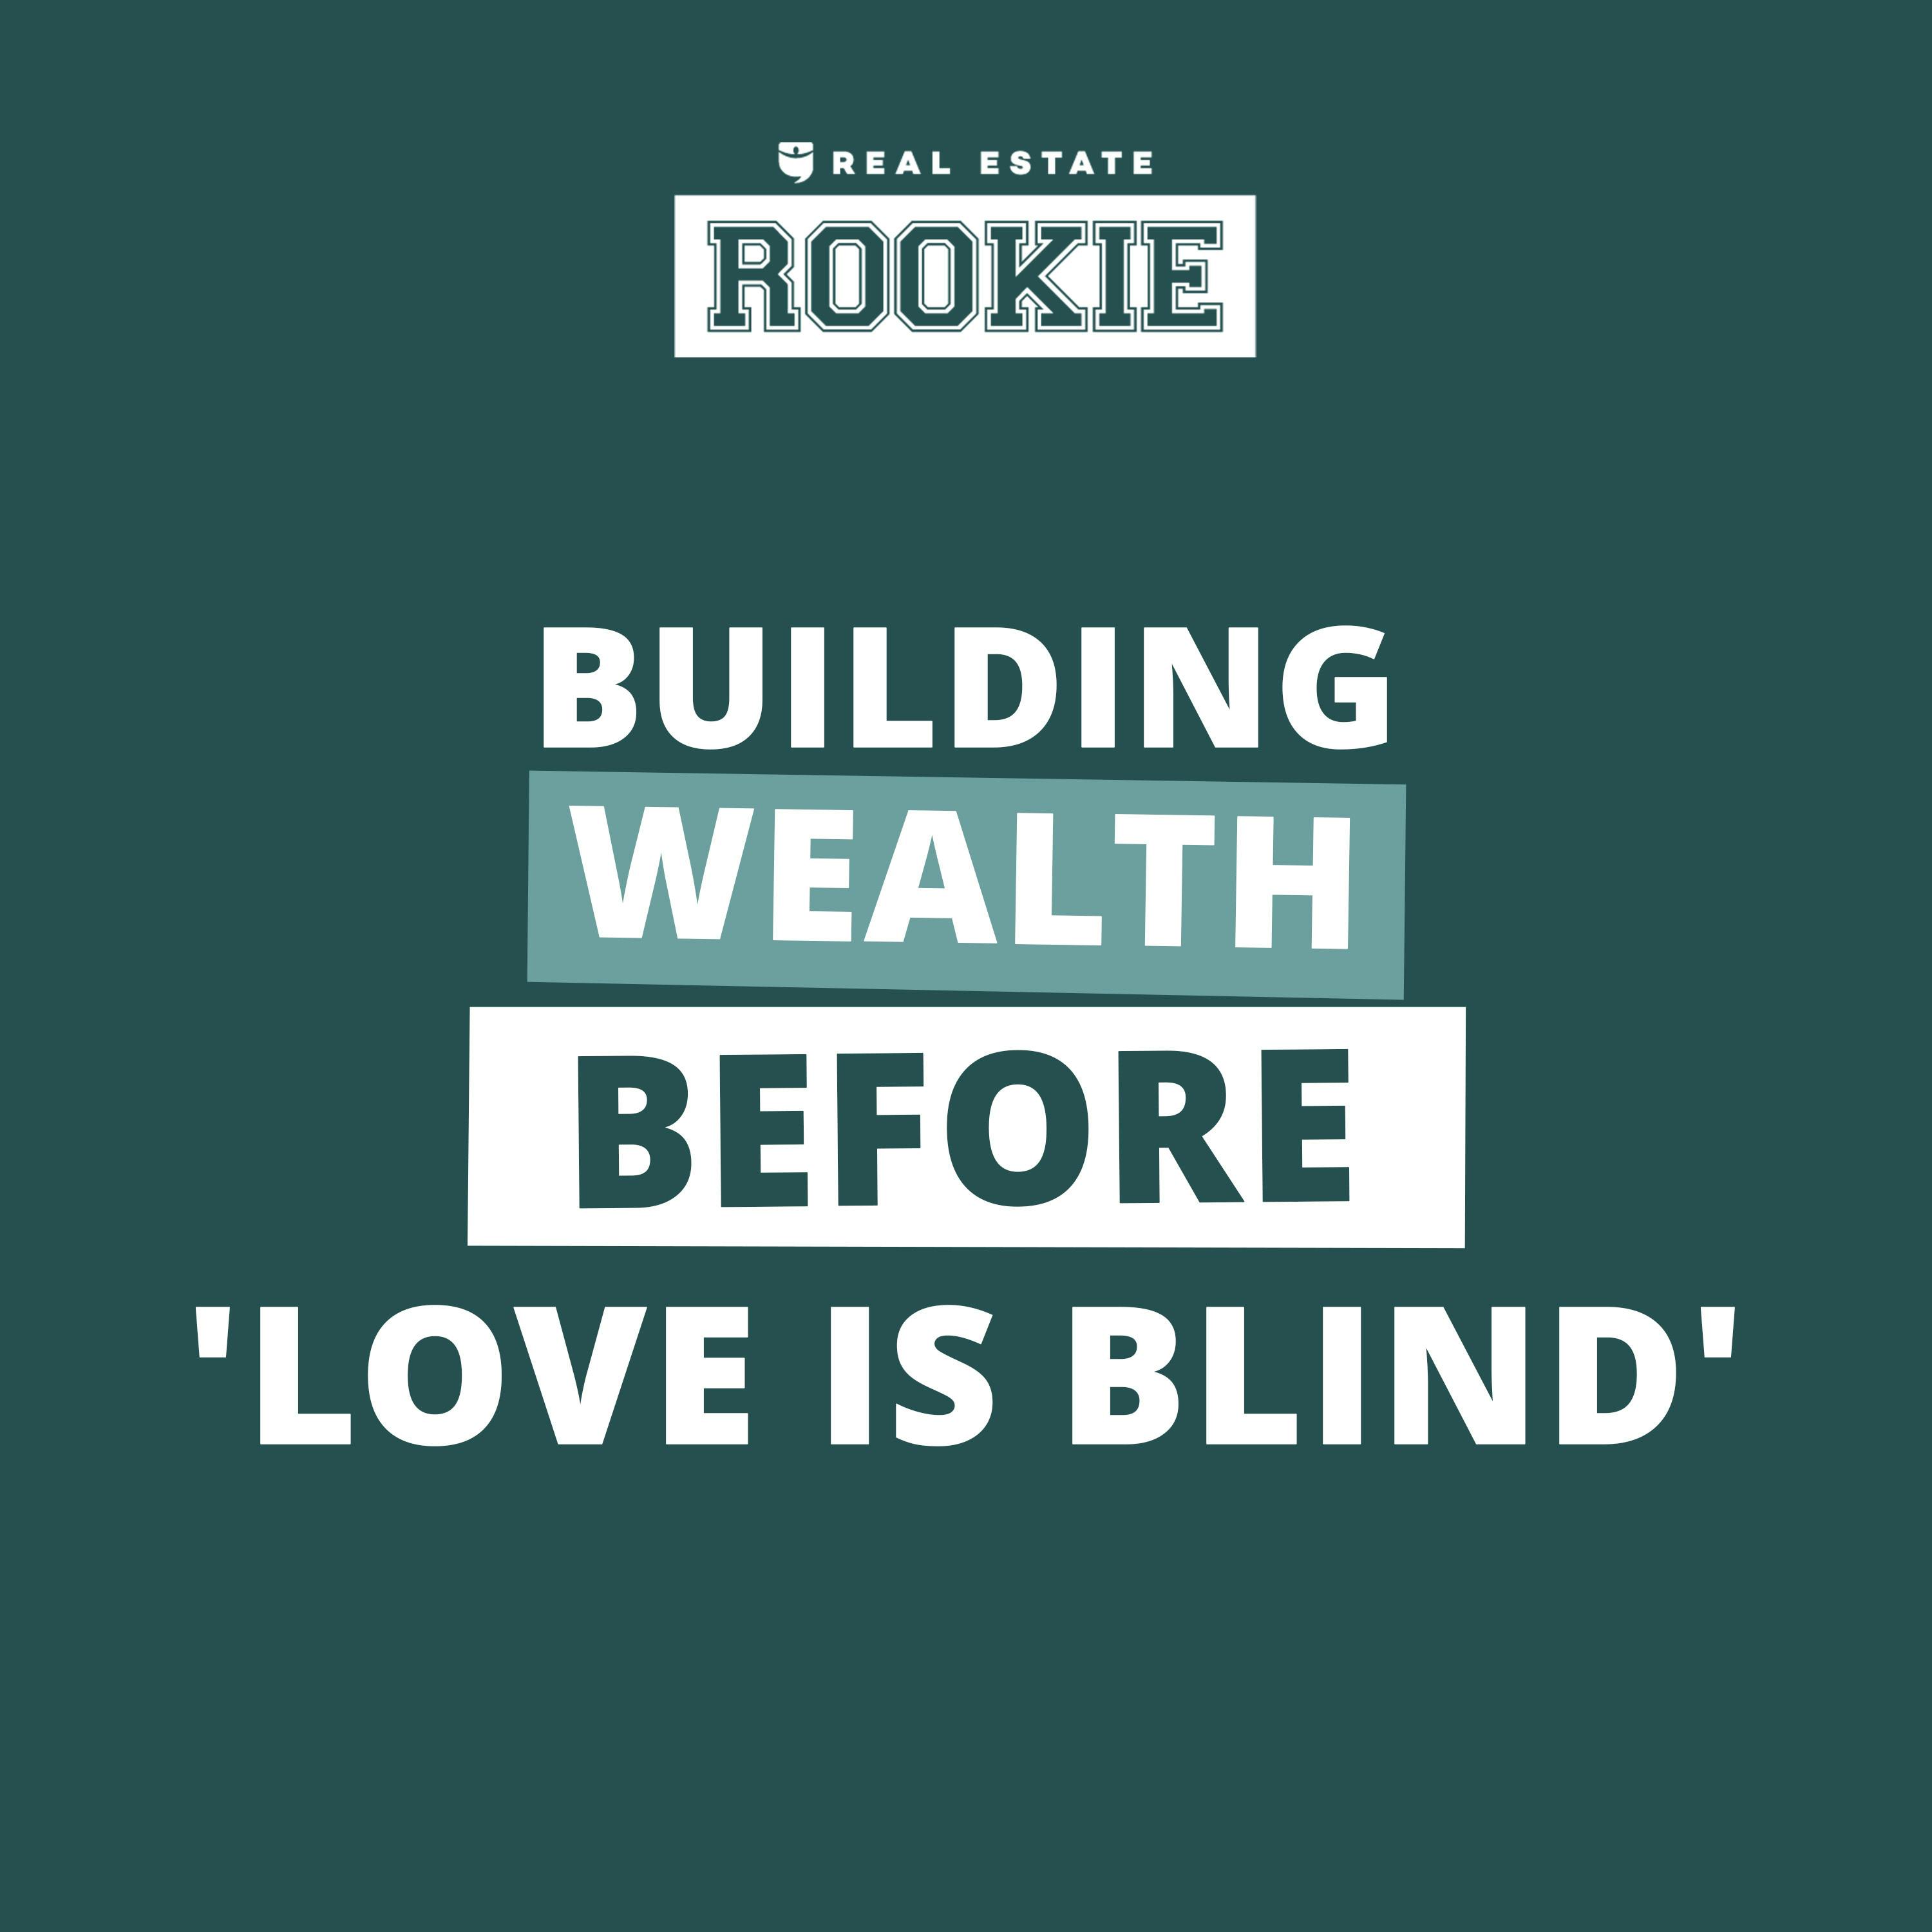 261: How Nancy Rodriguez from 'Love is Blind' Hit Financial Freedom BEFORE Fame